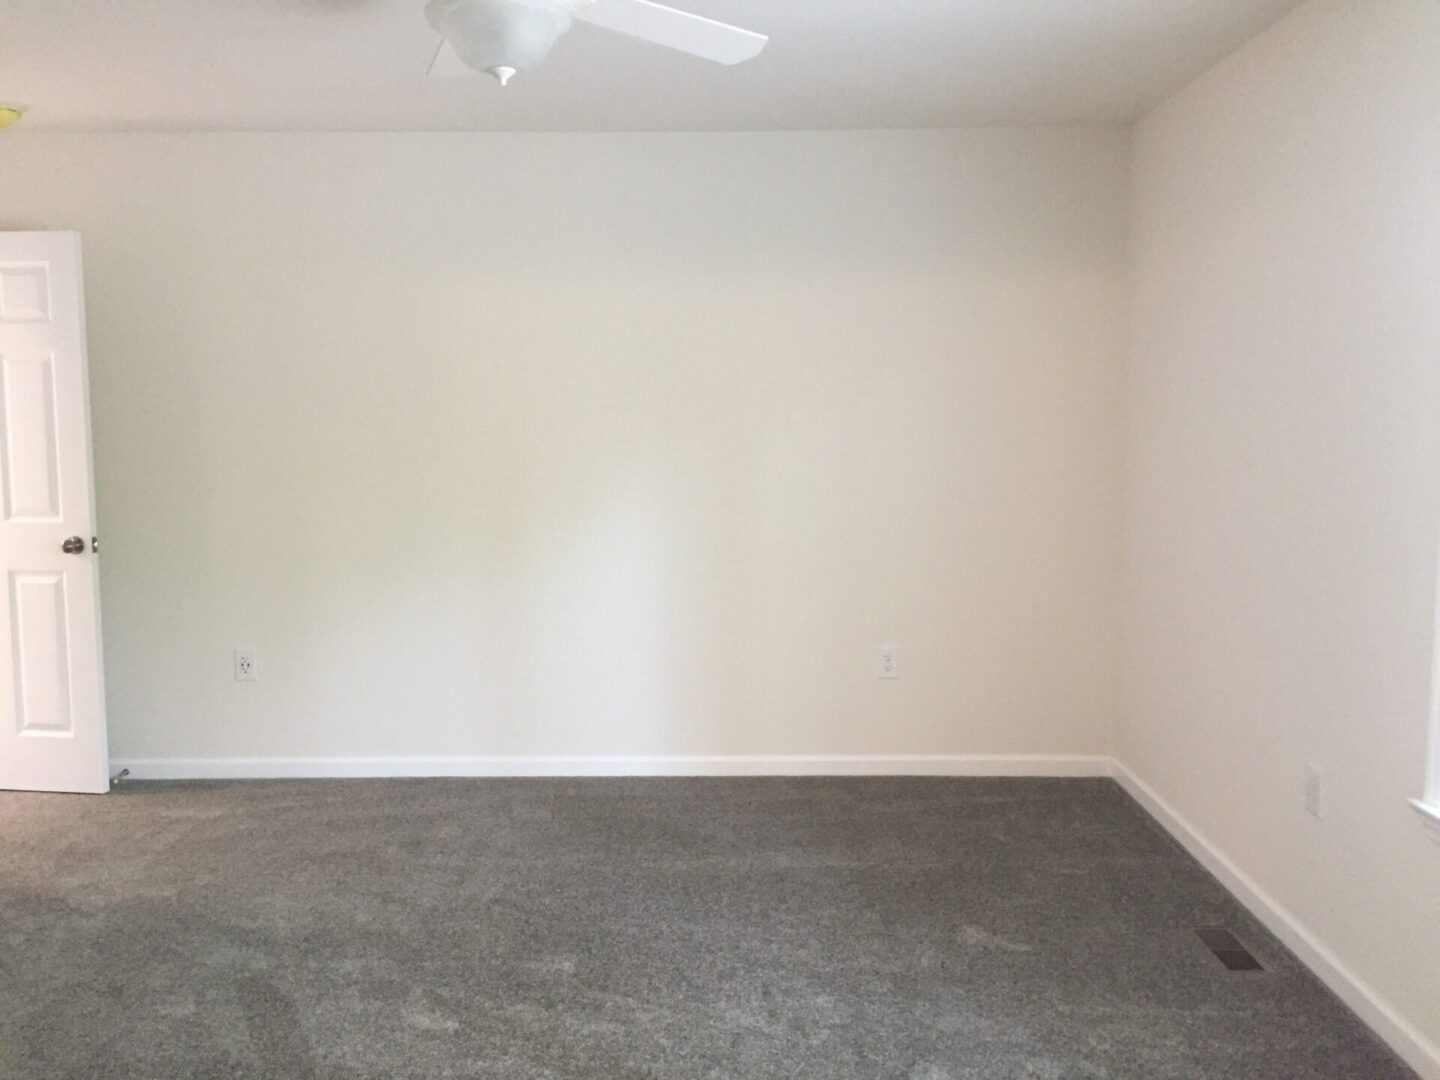 Empty room with white walls and a ceiling fan